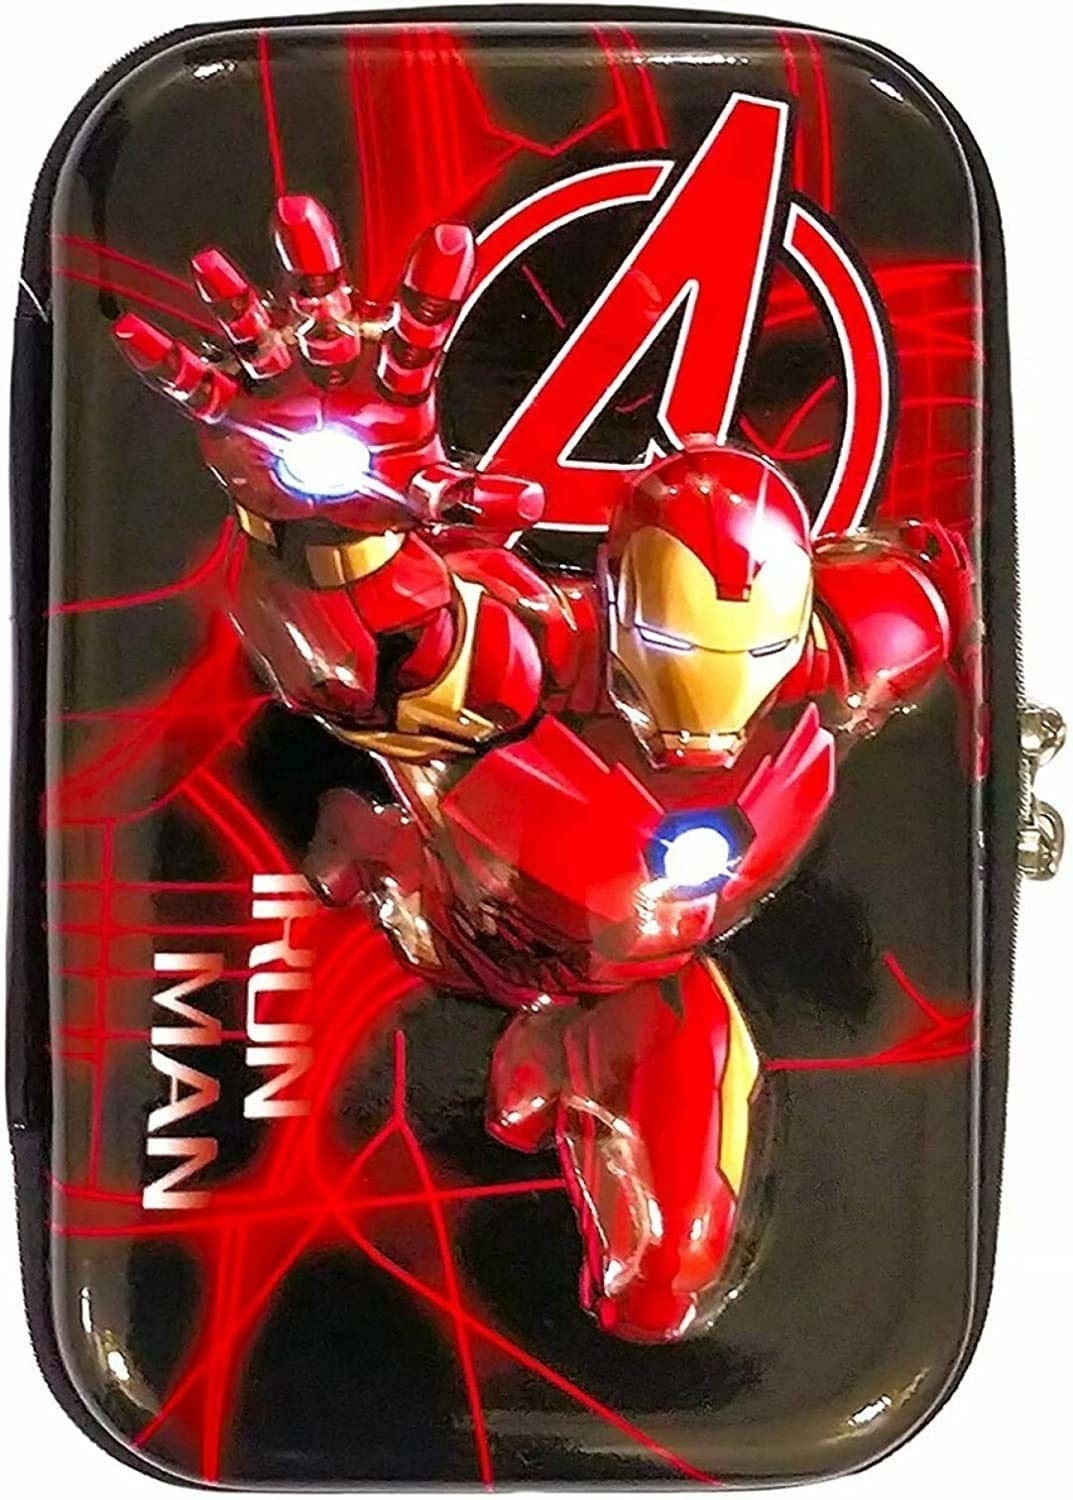 A multipurpose pouch with Ironman in his iconic stance on it.